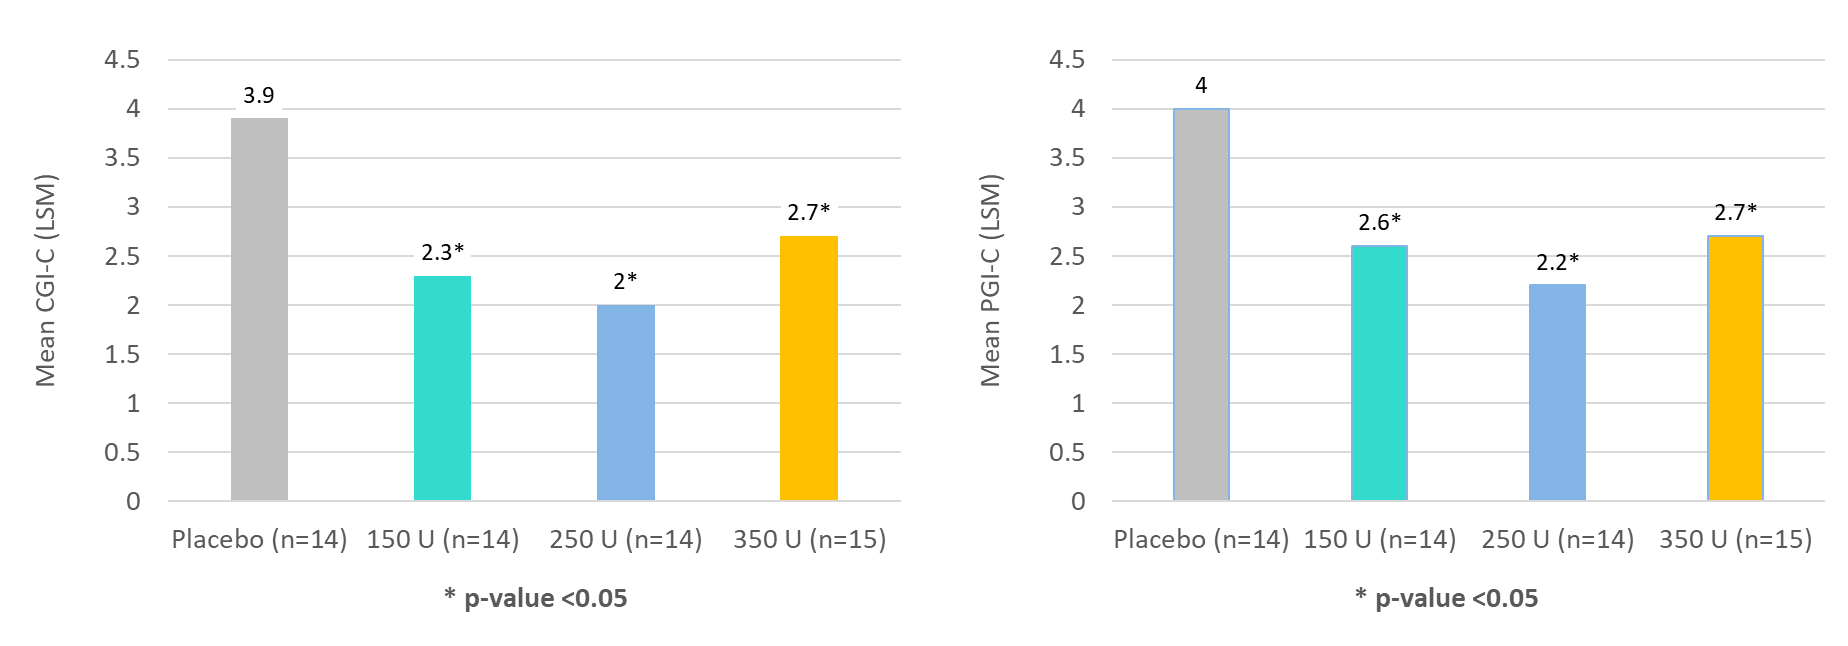 CGI-C reflects the physician’s perception of the patient’s health status by rating the patient on a 7-point scale from “very much improved” (a score of 1) to “very much worse” (a score of 7).  Similarly, PGI-C enables the patient to rate their changes on the same scale. The Clinicians Global Impression of Change (CGI-C) was highly statistically significant at all three dose levels, as was the Patients Global Impression of Change (PGI-C).